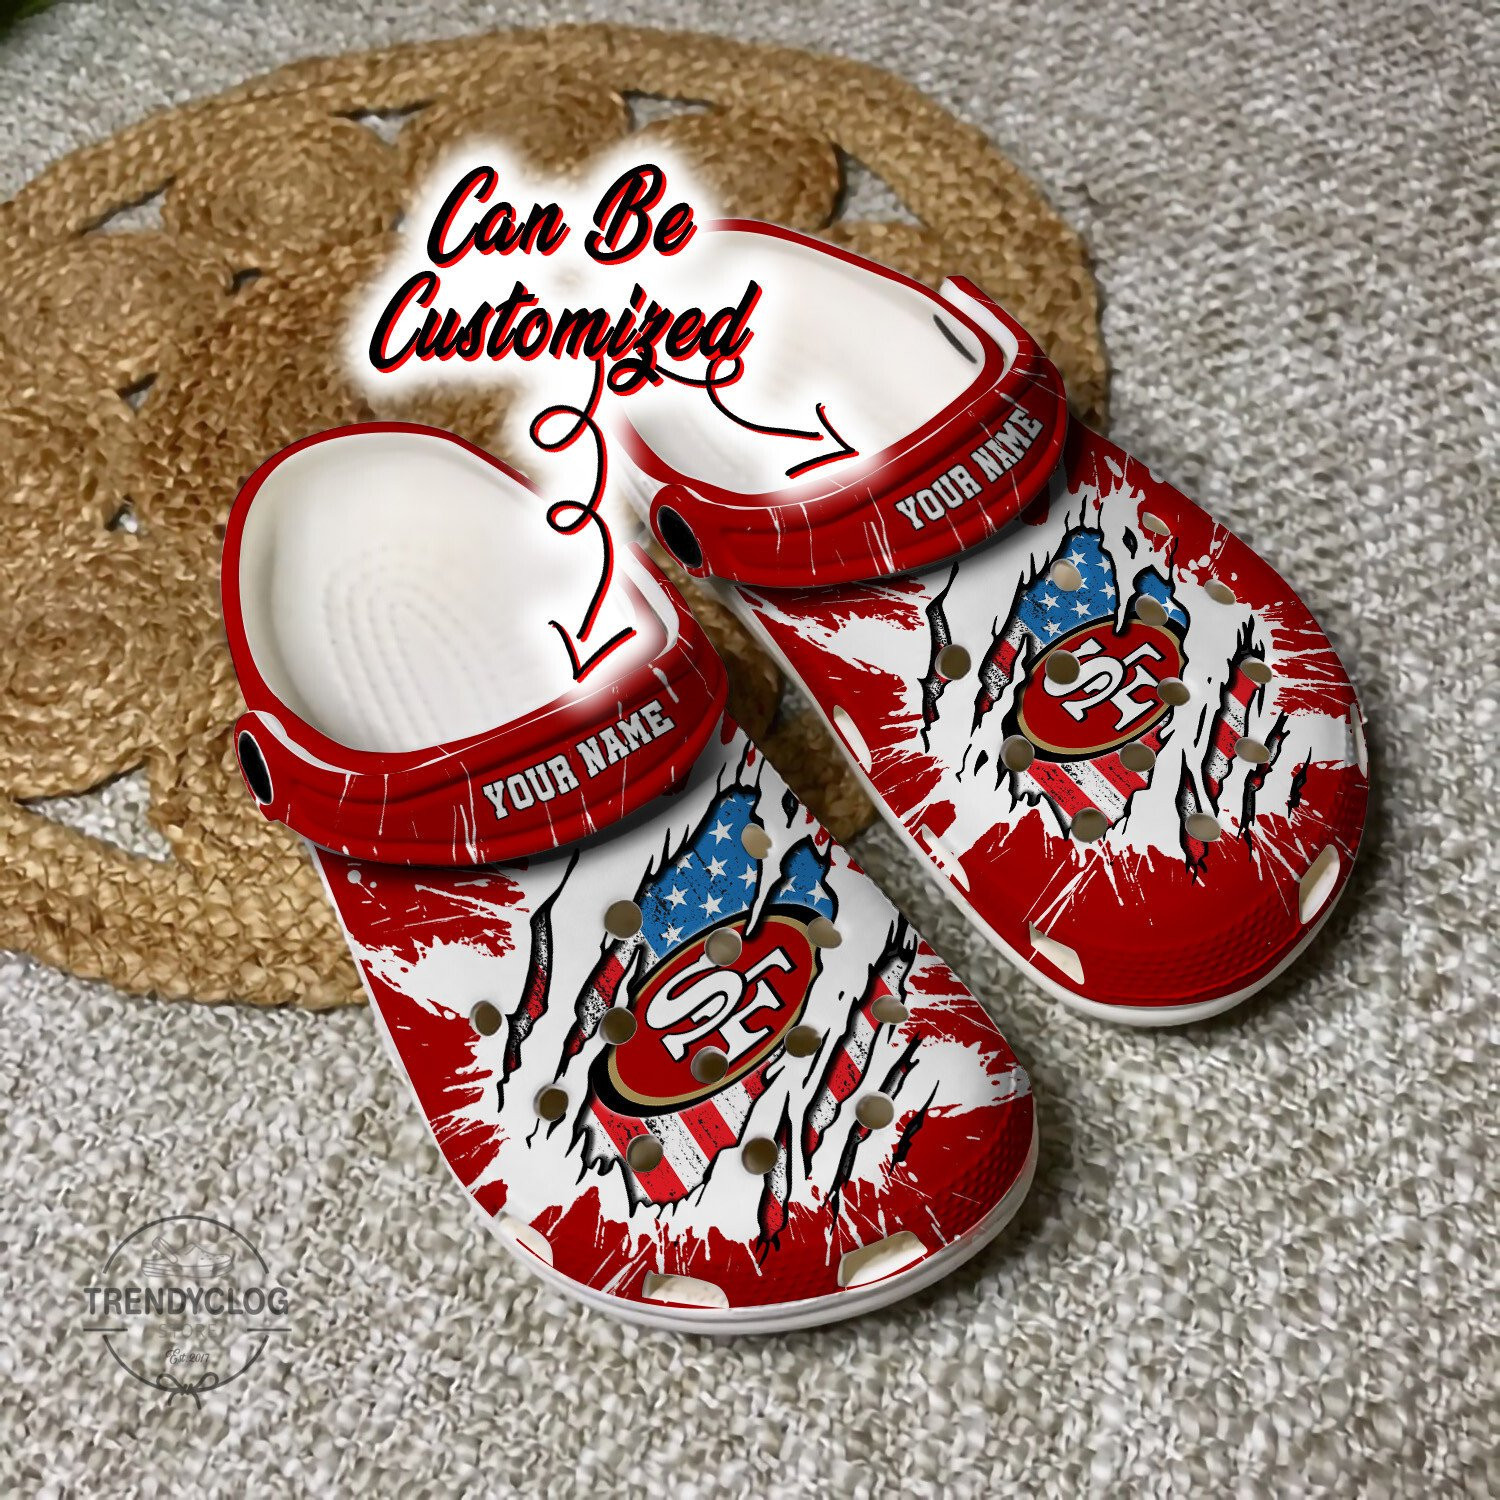 49ers Crocs Personalized SF 49ers Football Ripped American Flag Clog Shoes